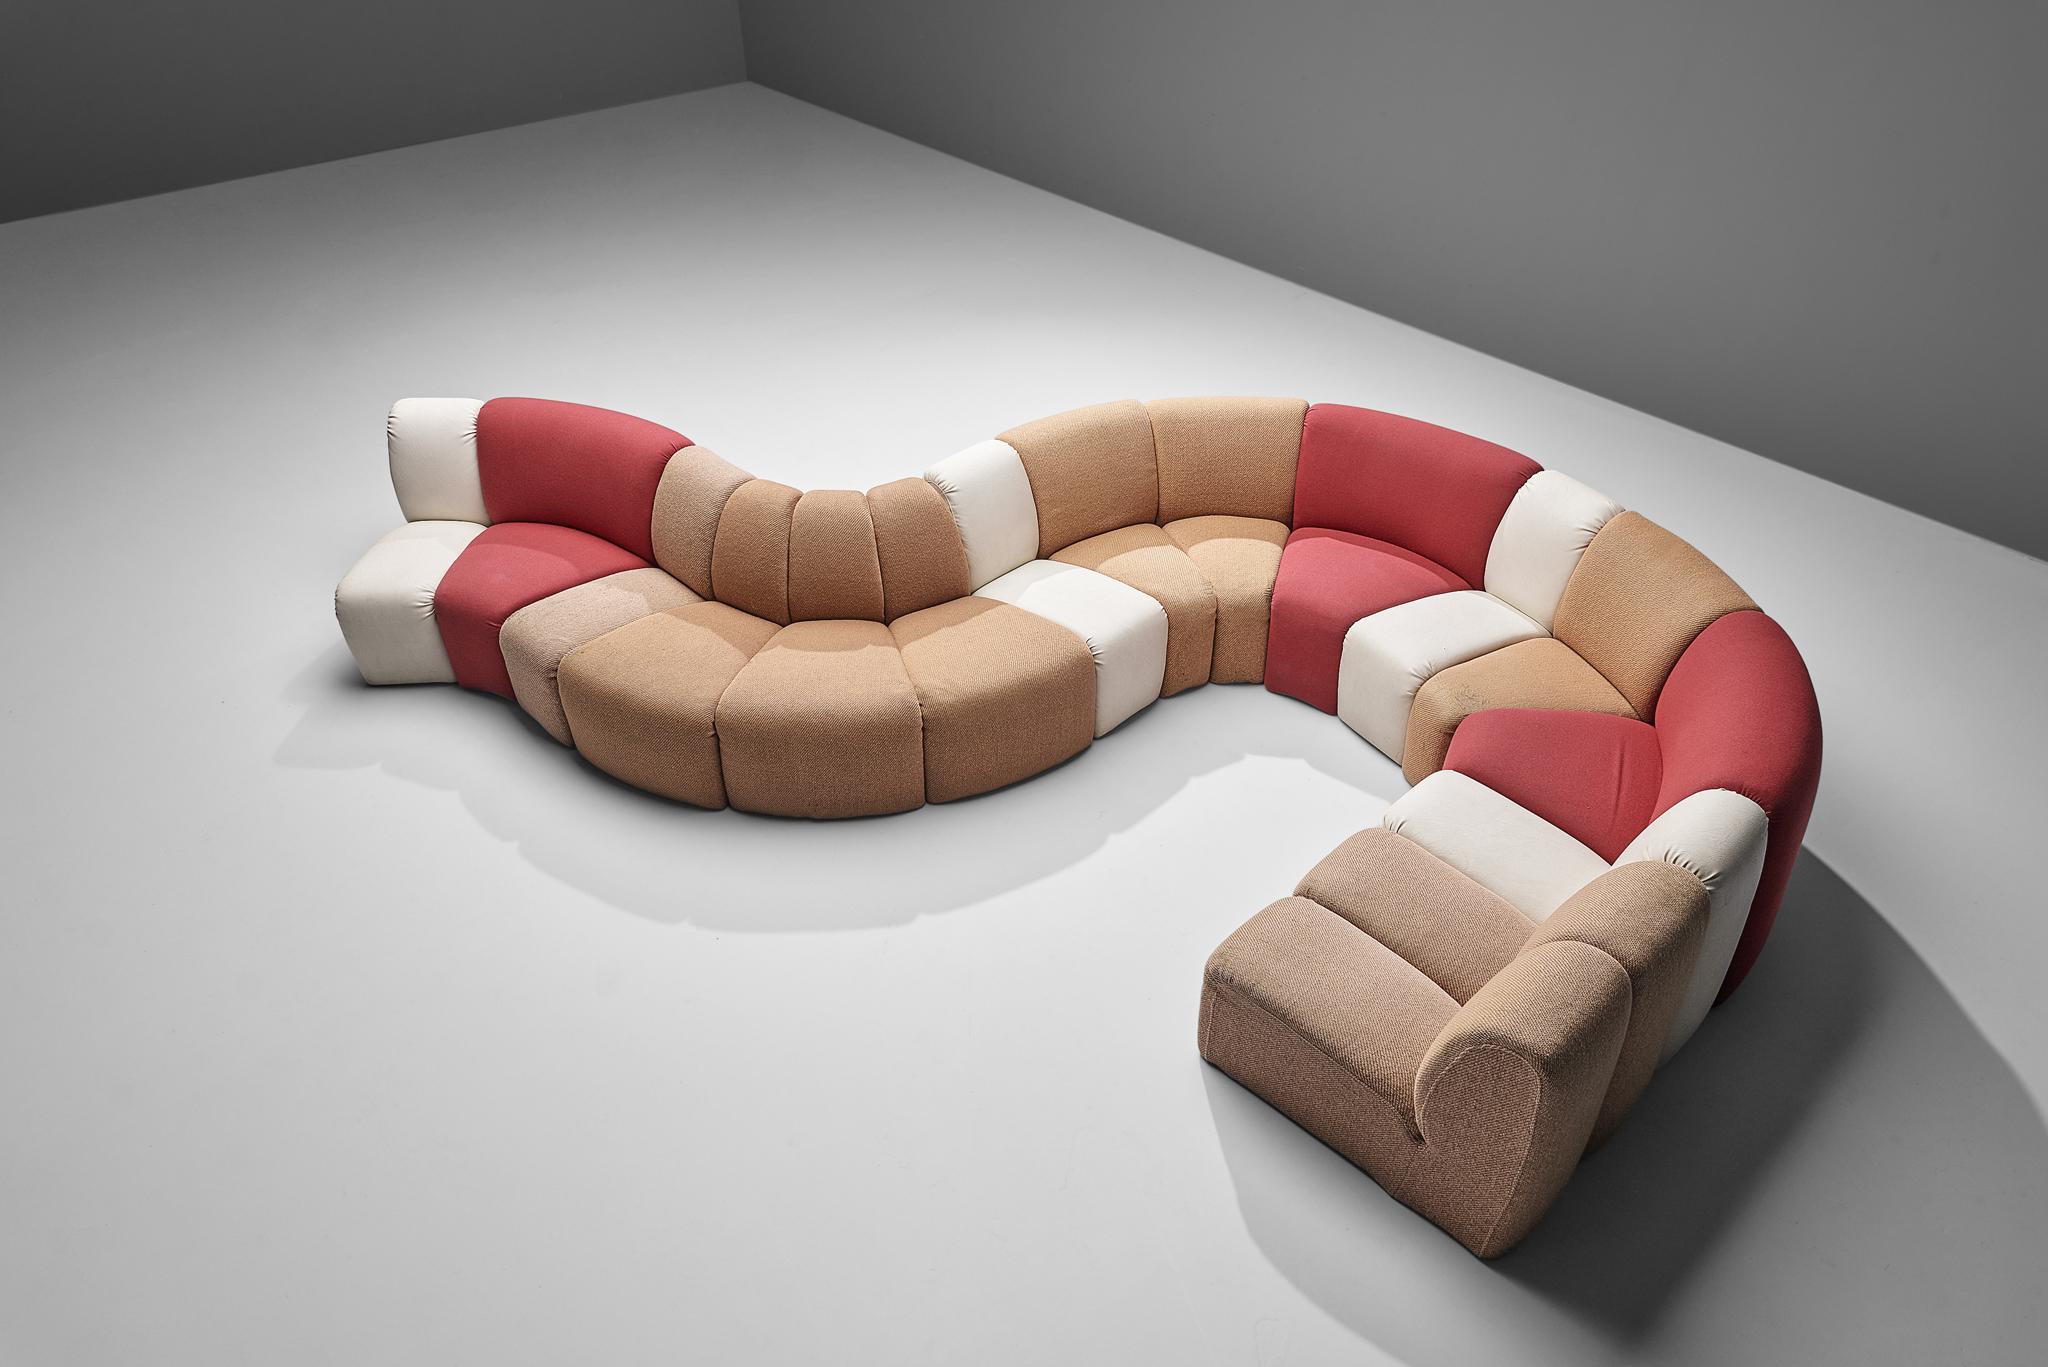 Pierre Paulin for Artifort, large 16 element sectional sofa 'Mississippi', Belgium, 1978

French designer Pierre Paulin created the 'Mississippi' in 1978. 16 seating elements can be placed in different compositions, forming one large sofa or used as